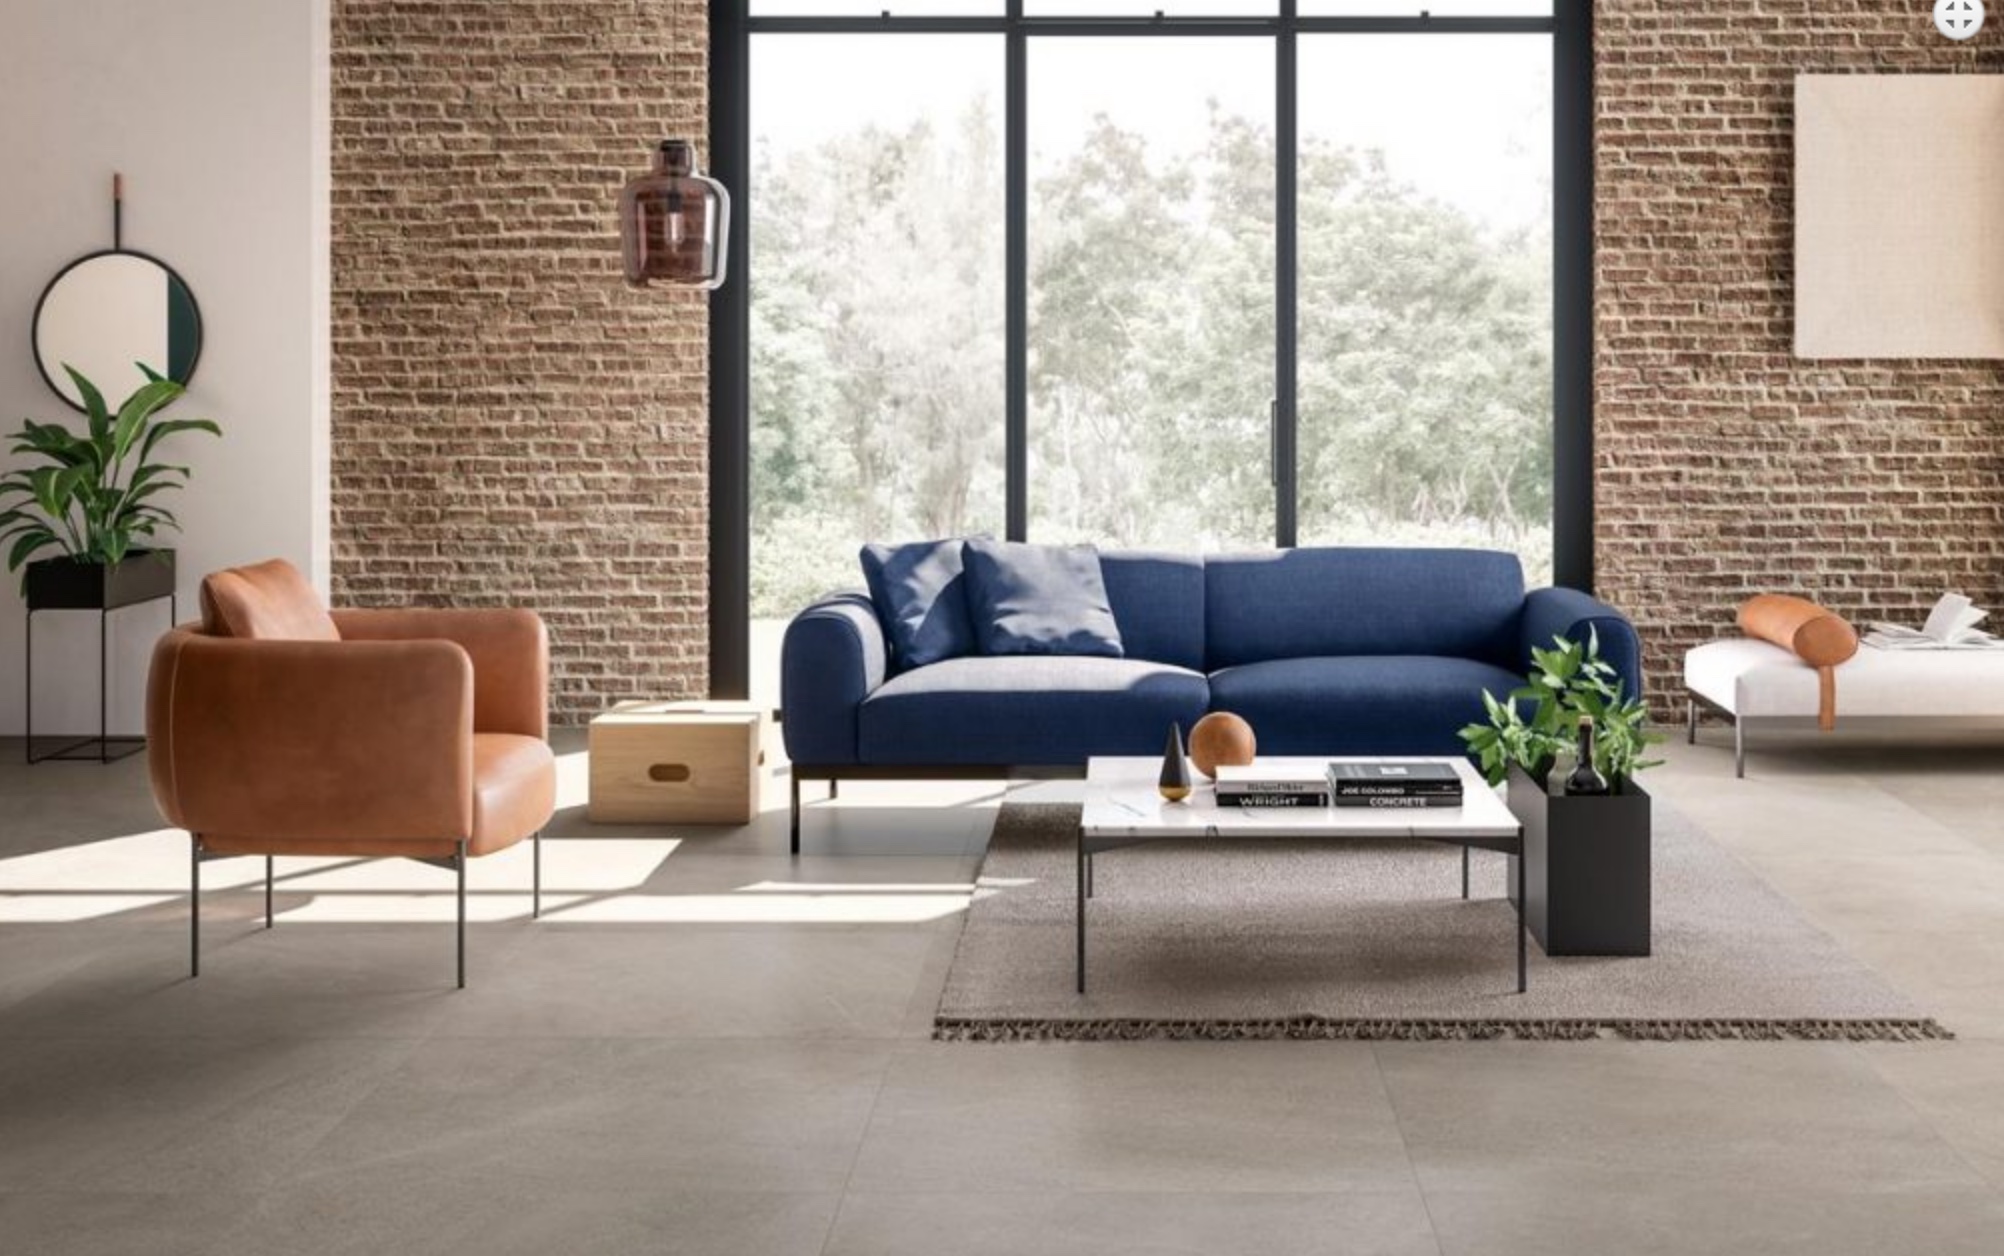 Blustyle's Yosemite Collection of tiles in living room